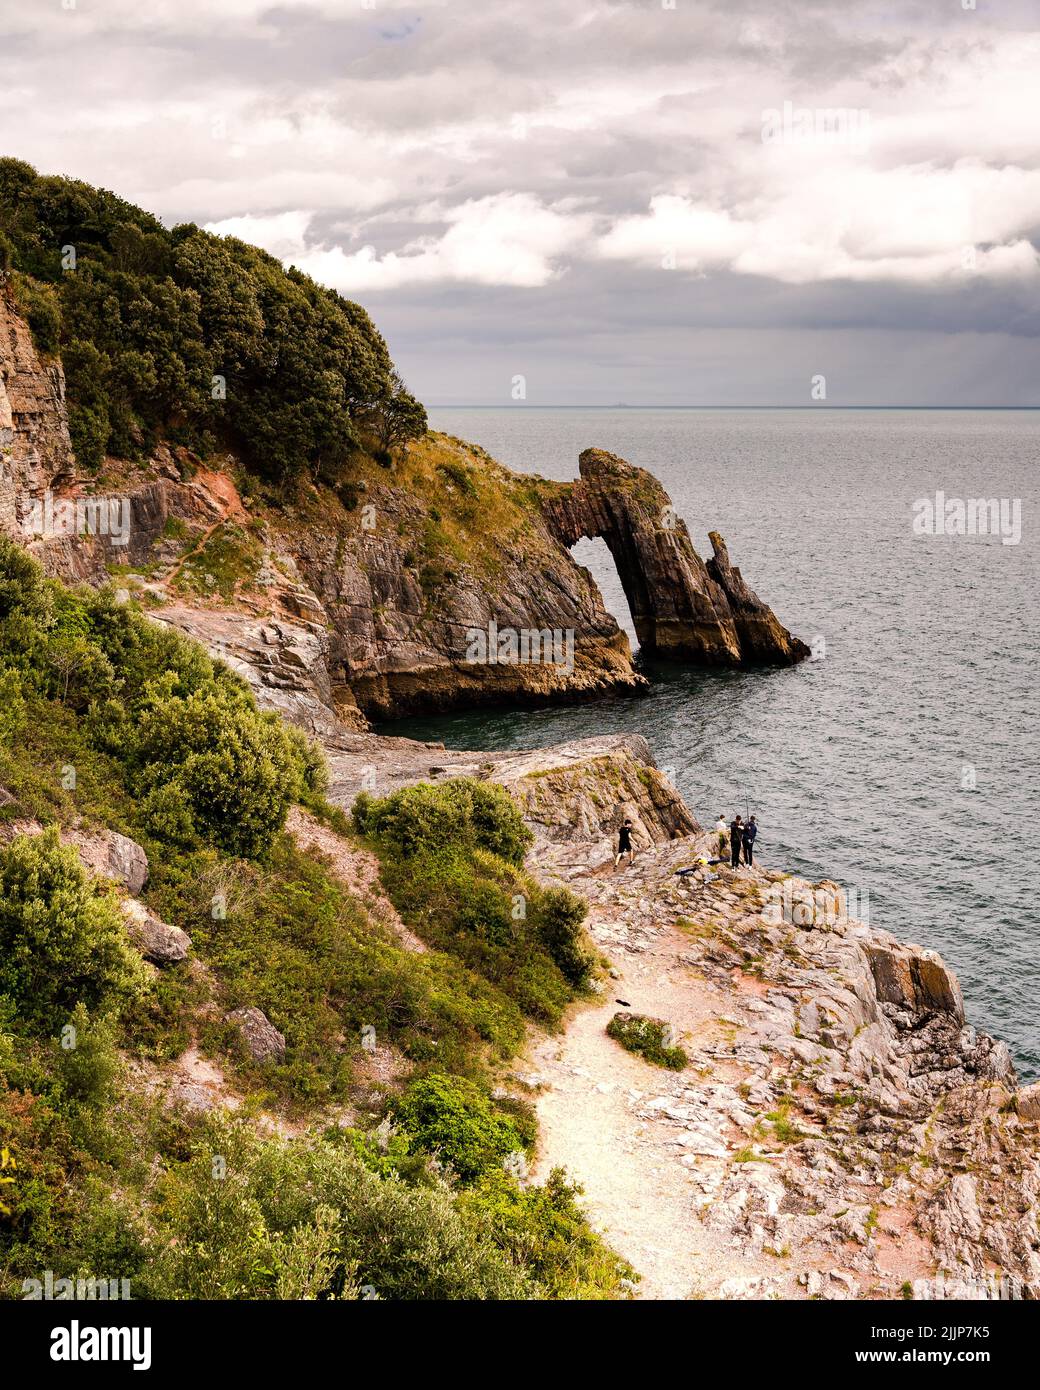 A beautiful view of rocky beach surrounded by trees and bushes in Torquay Stock Photo